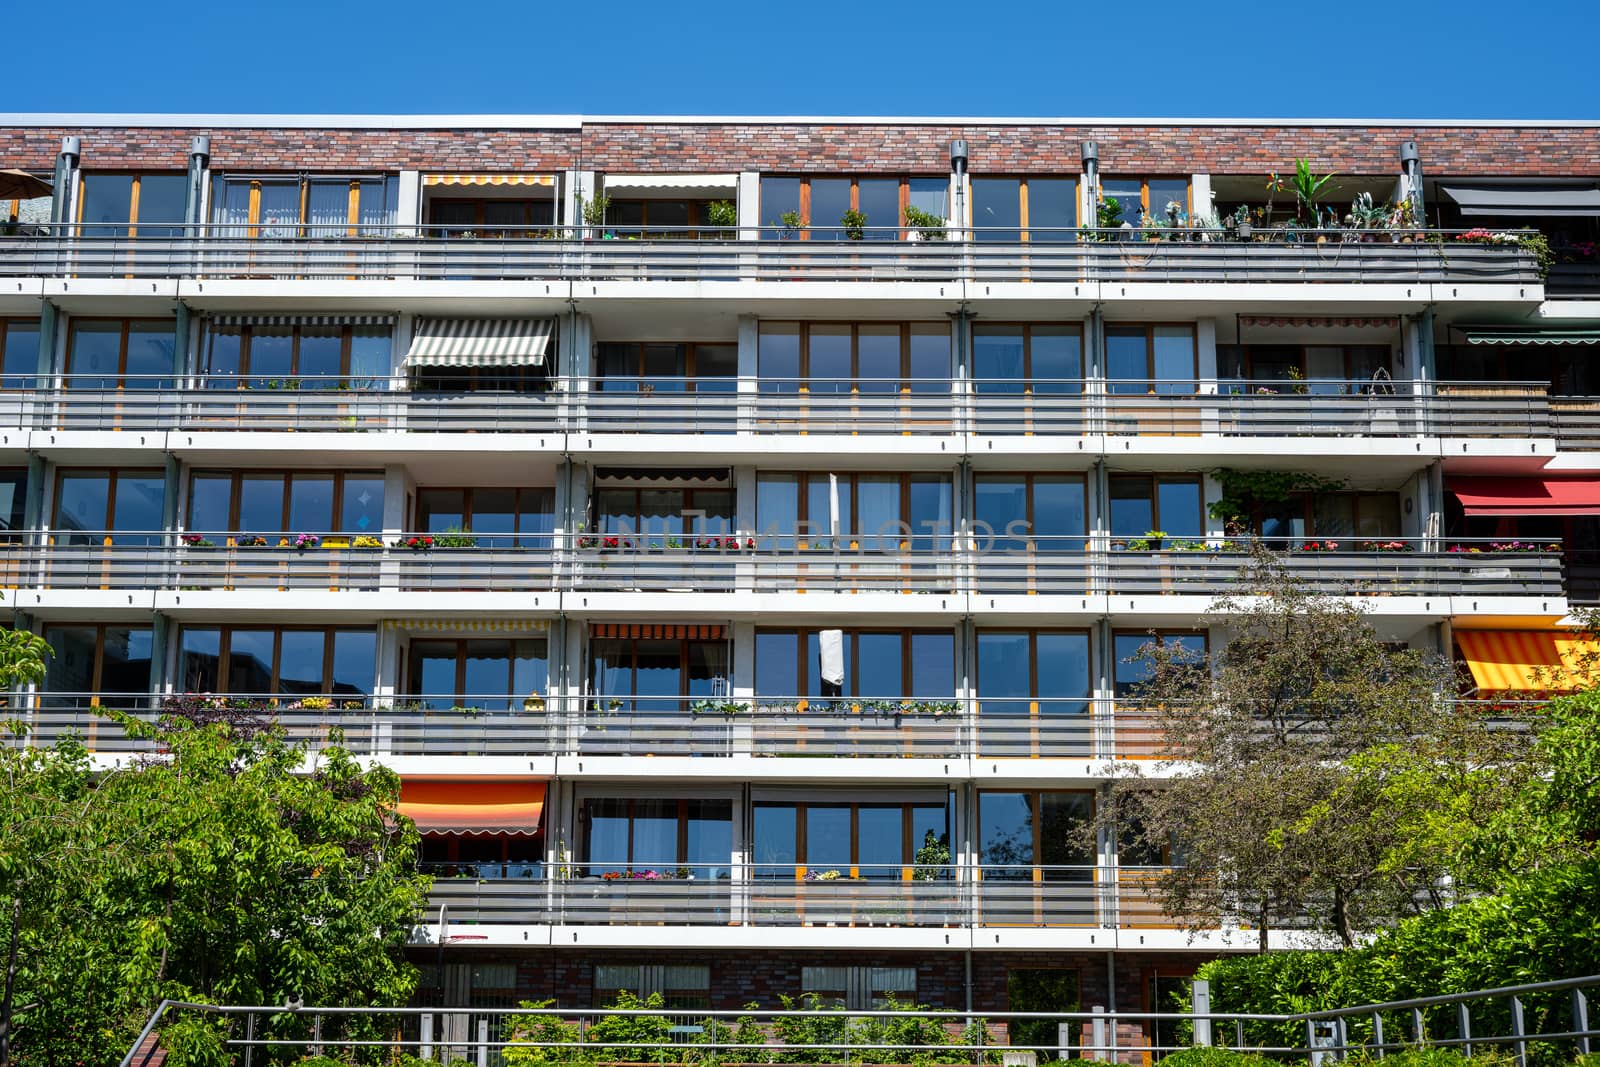 Facade of a modern apartment block with many balconies seen in Berlin